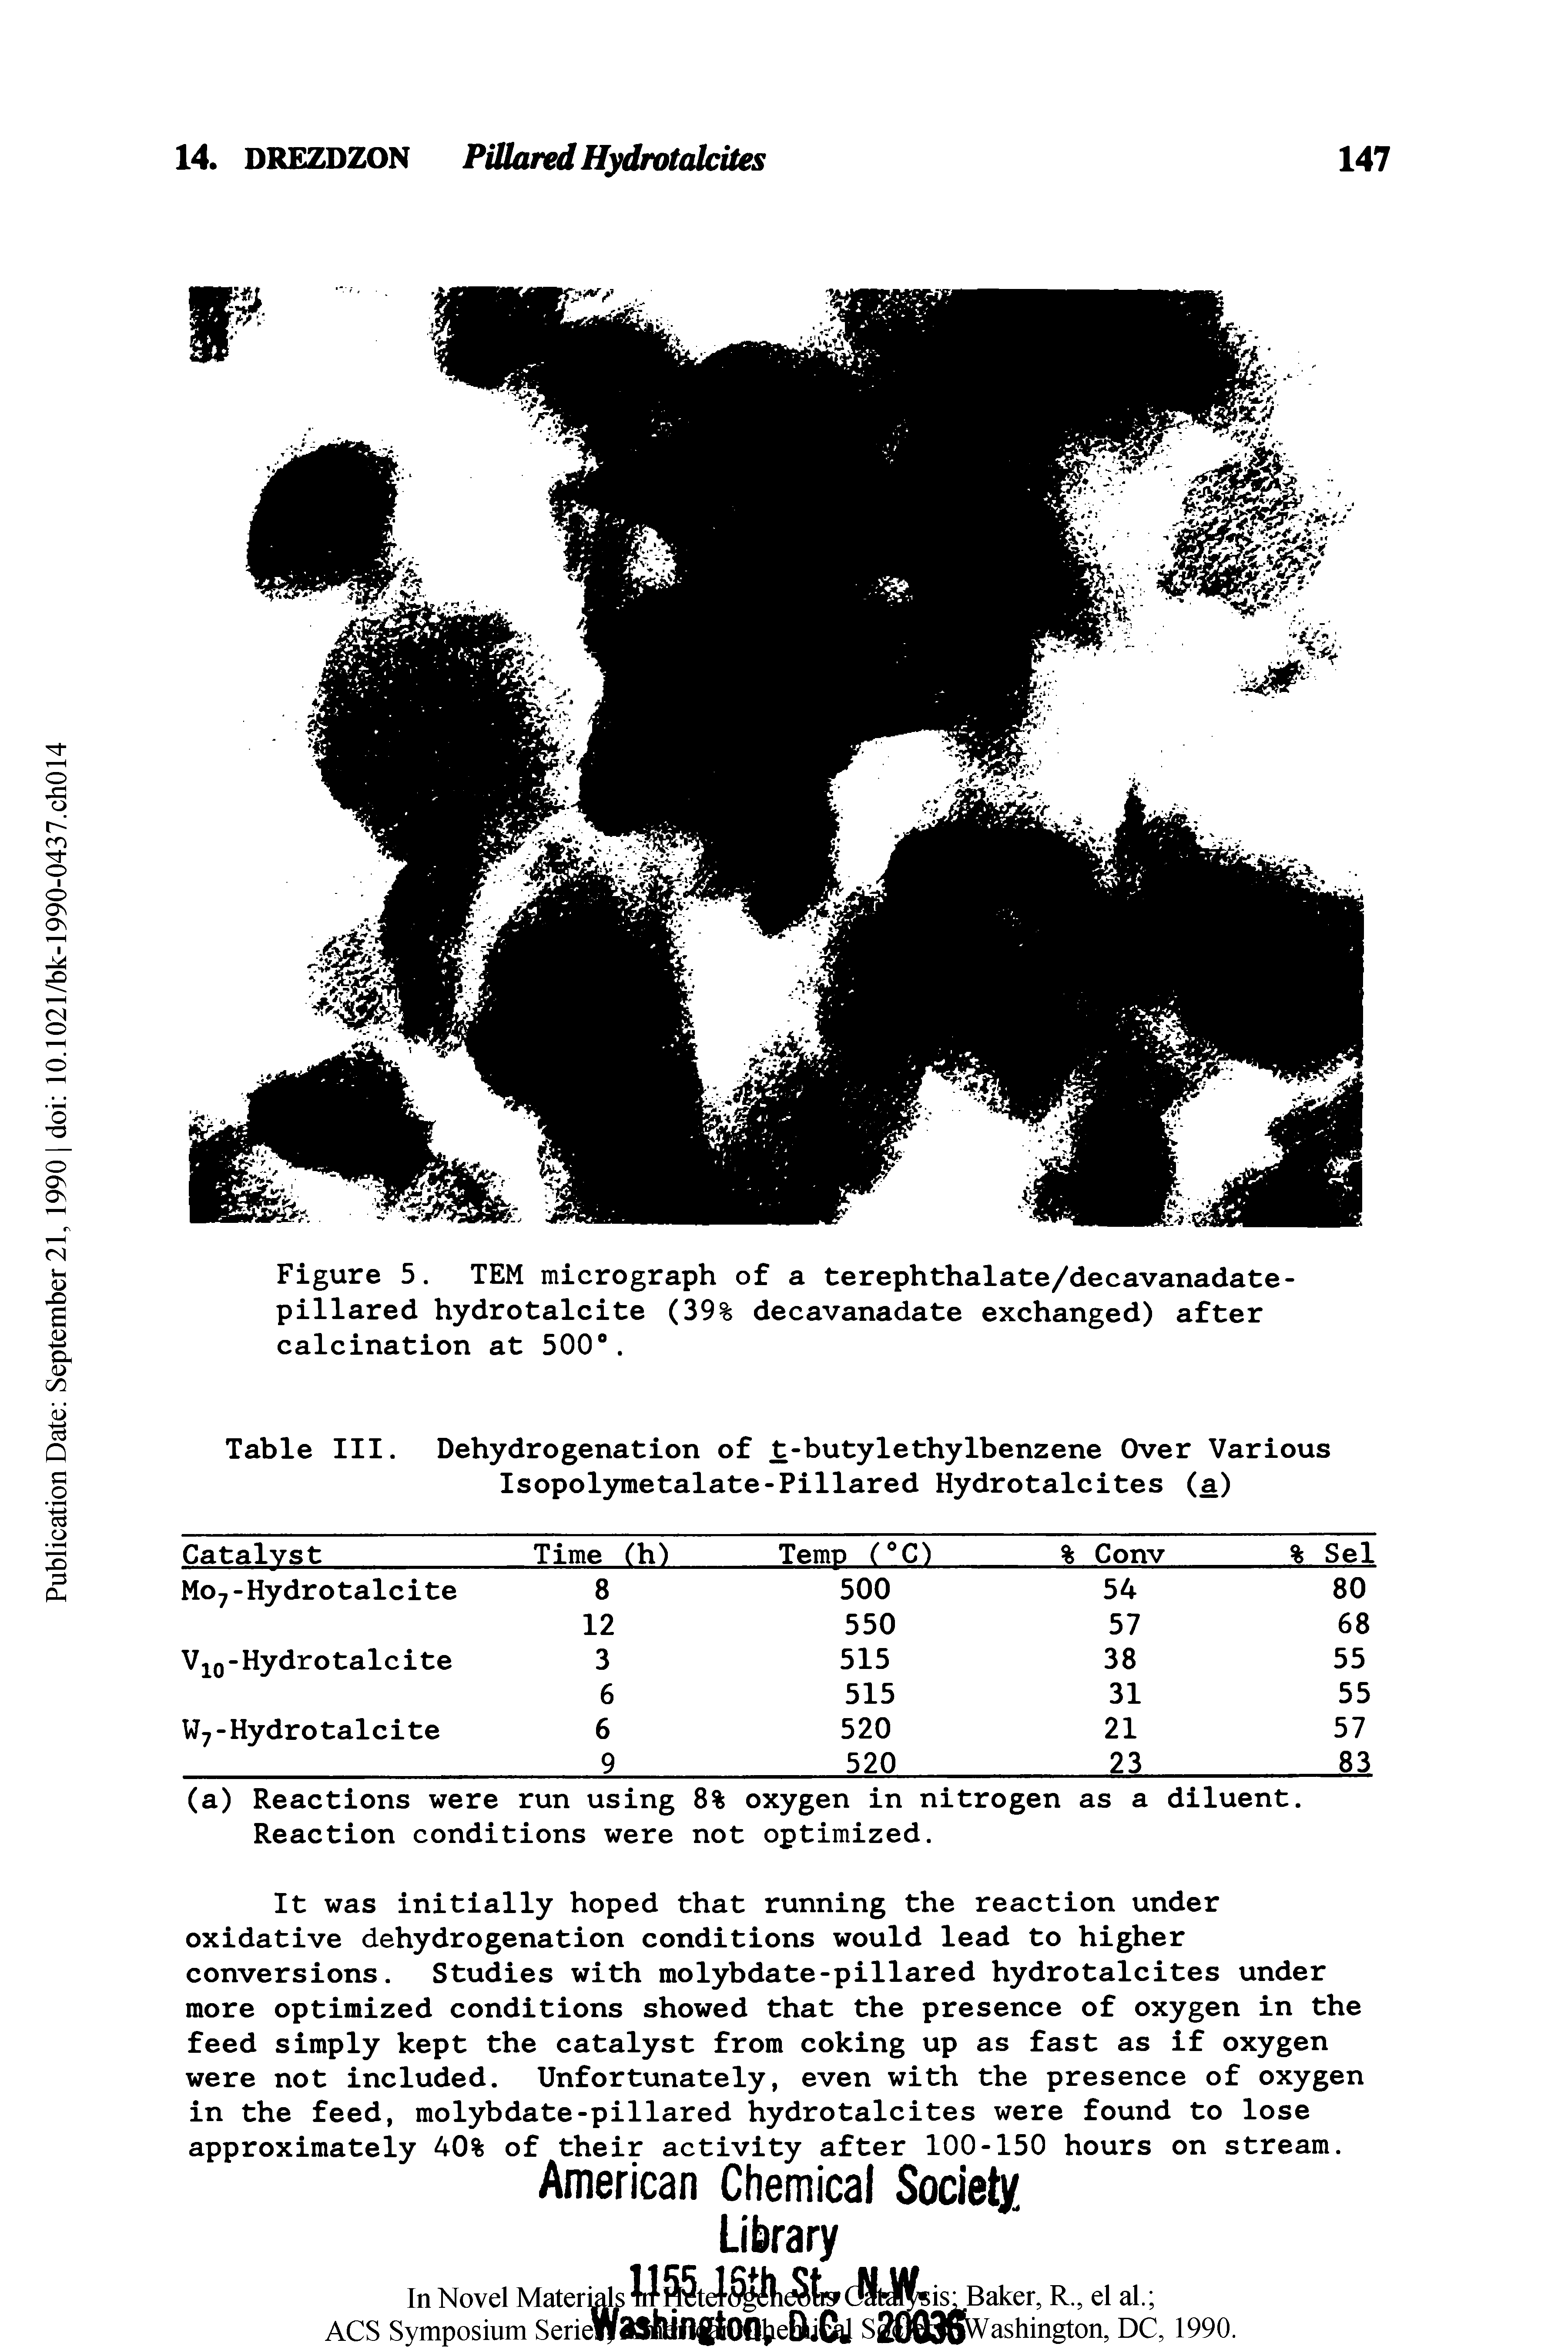 Figure 5. TEM micrograph of a terephthalate/decavanadate-pillared hydrotalcite (39% decavanadate exchanged) after calcination at 500 .